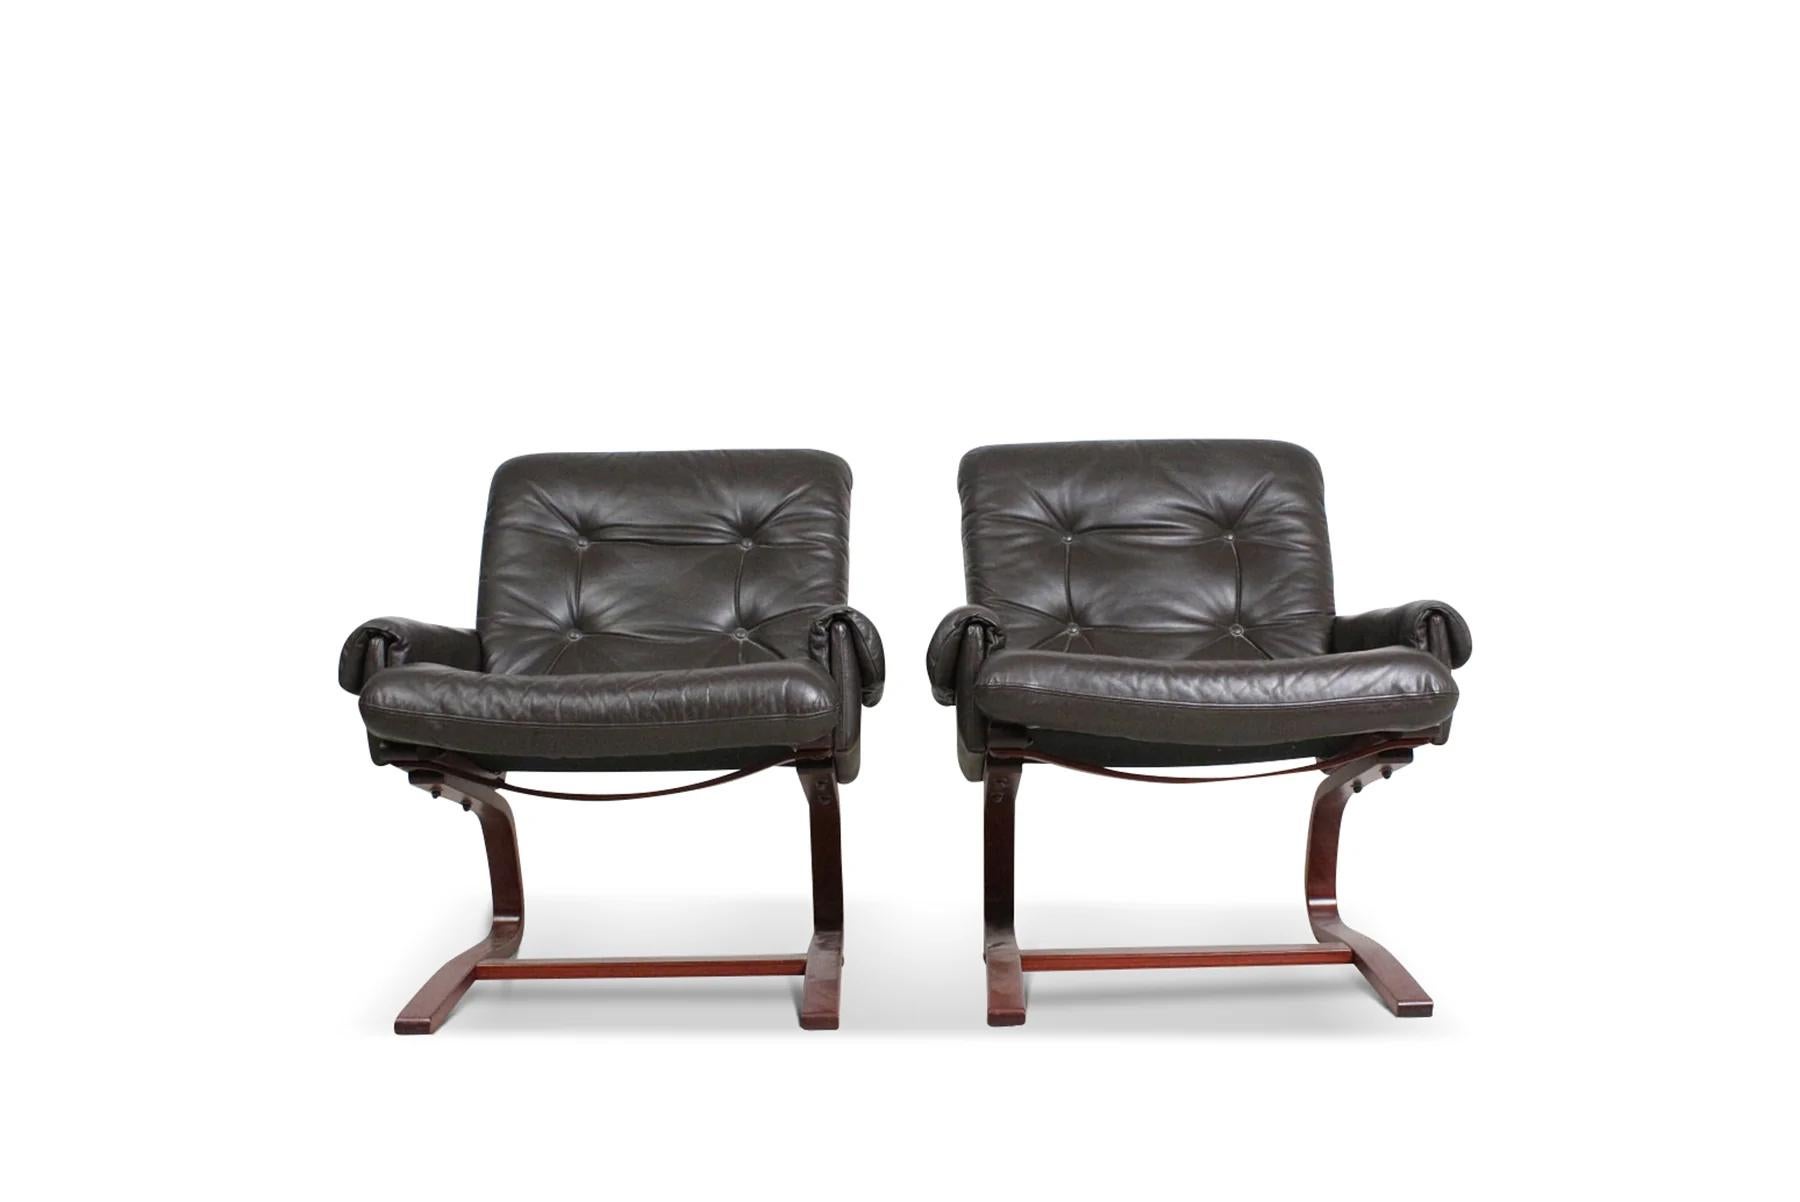 Pair of cantilevered leather lounge chairs by ingmar relling In Good Condition For Sale In Berkeley, CA